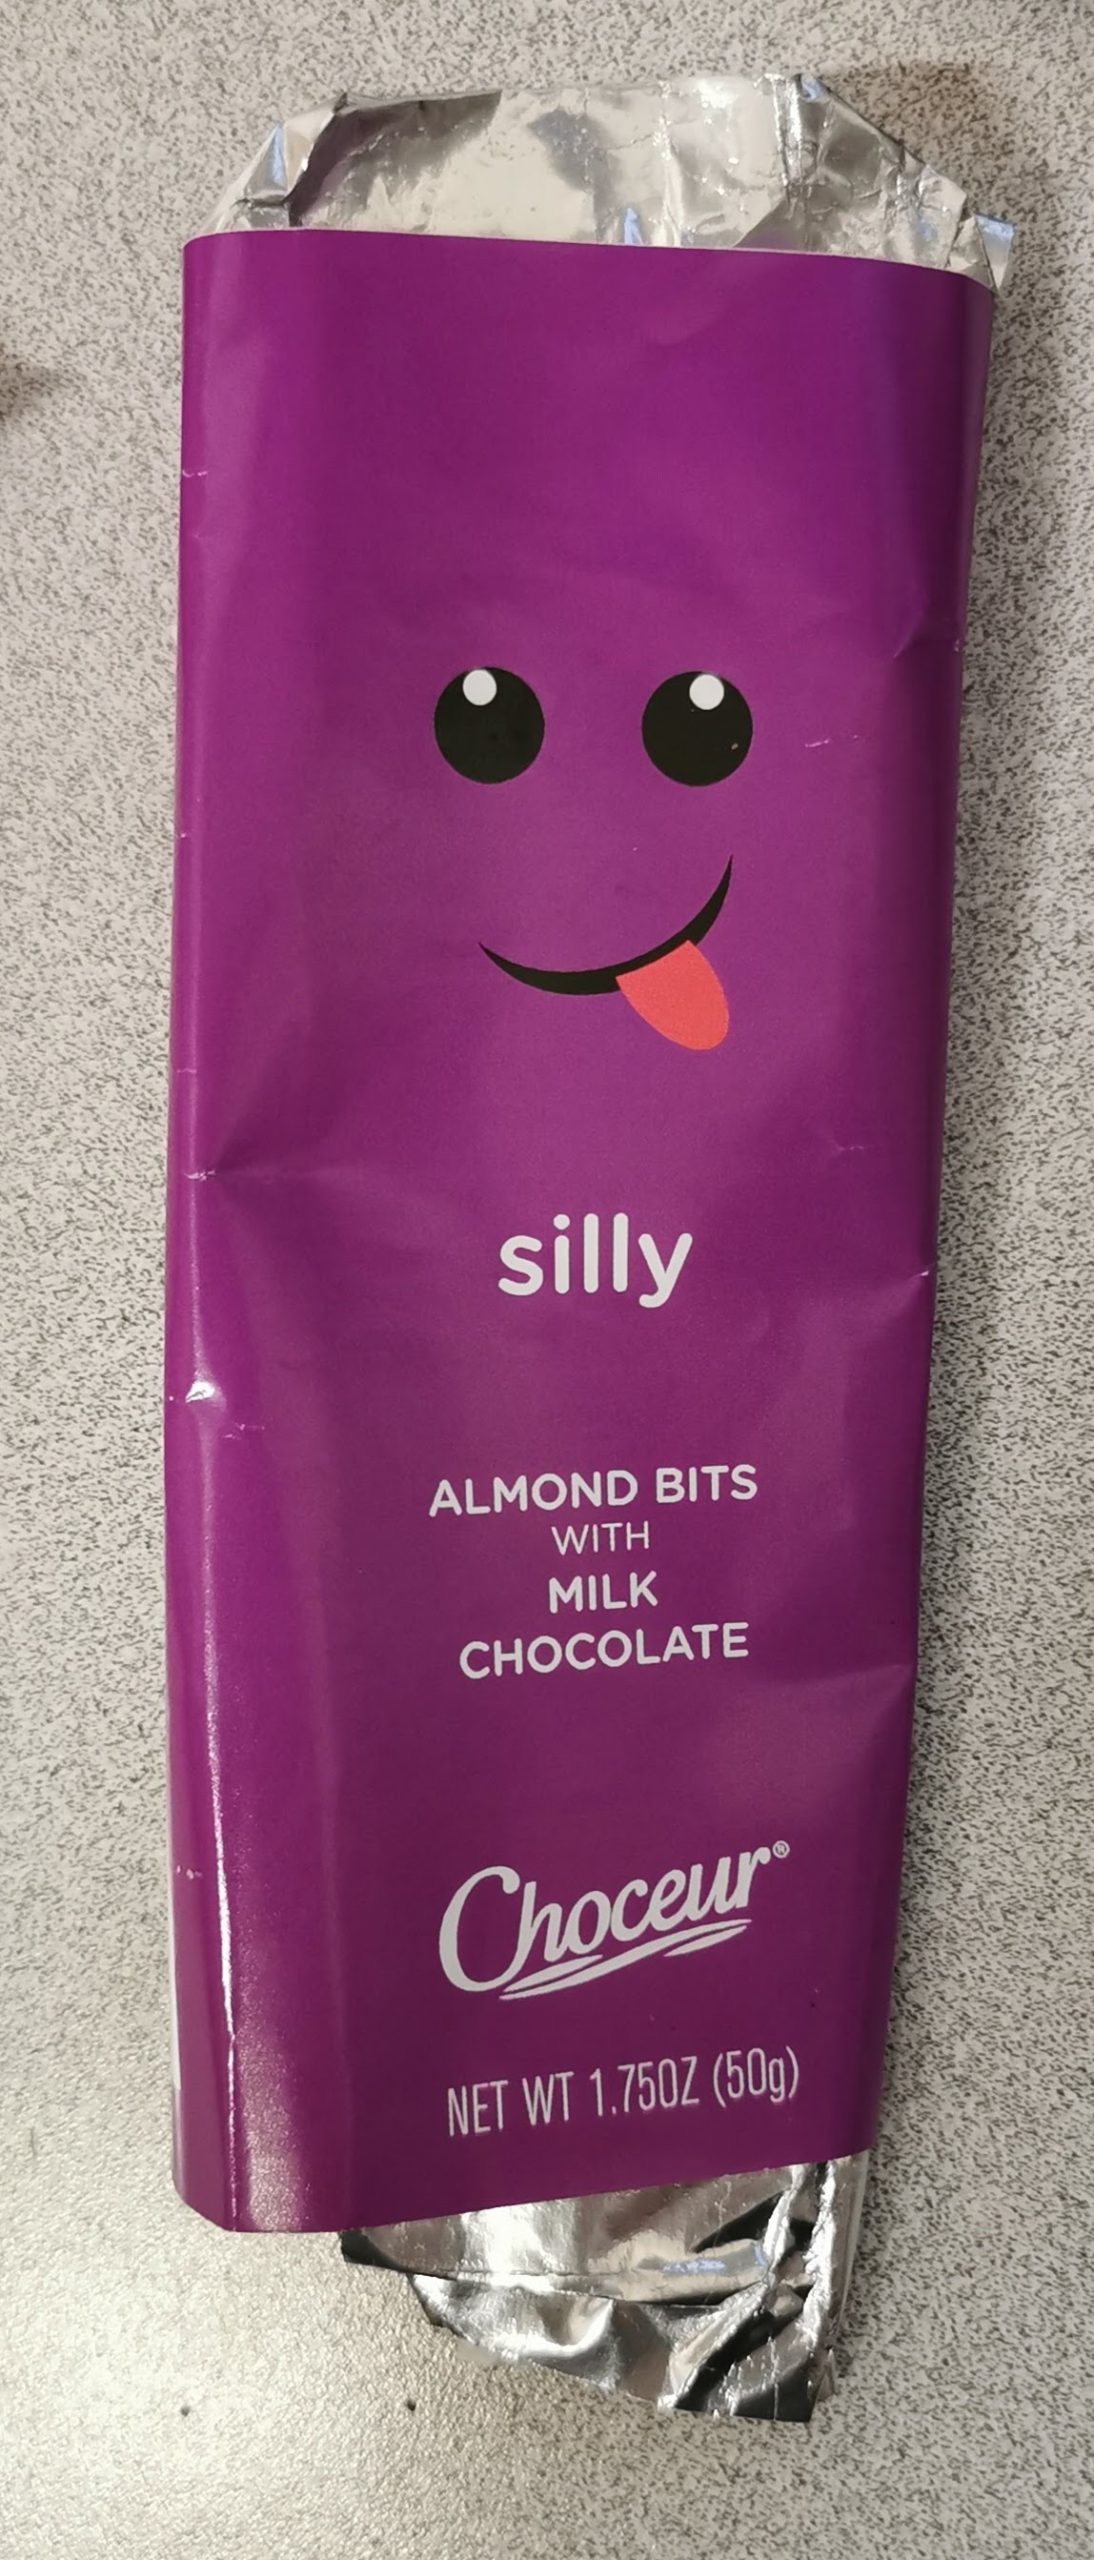 You are currently viewing Choceur “Silly” Almond Bits with Milk Chocolate Mood Bar (Aldi)